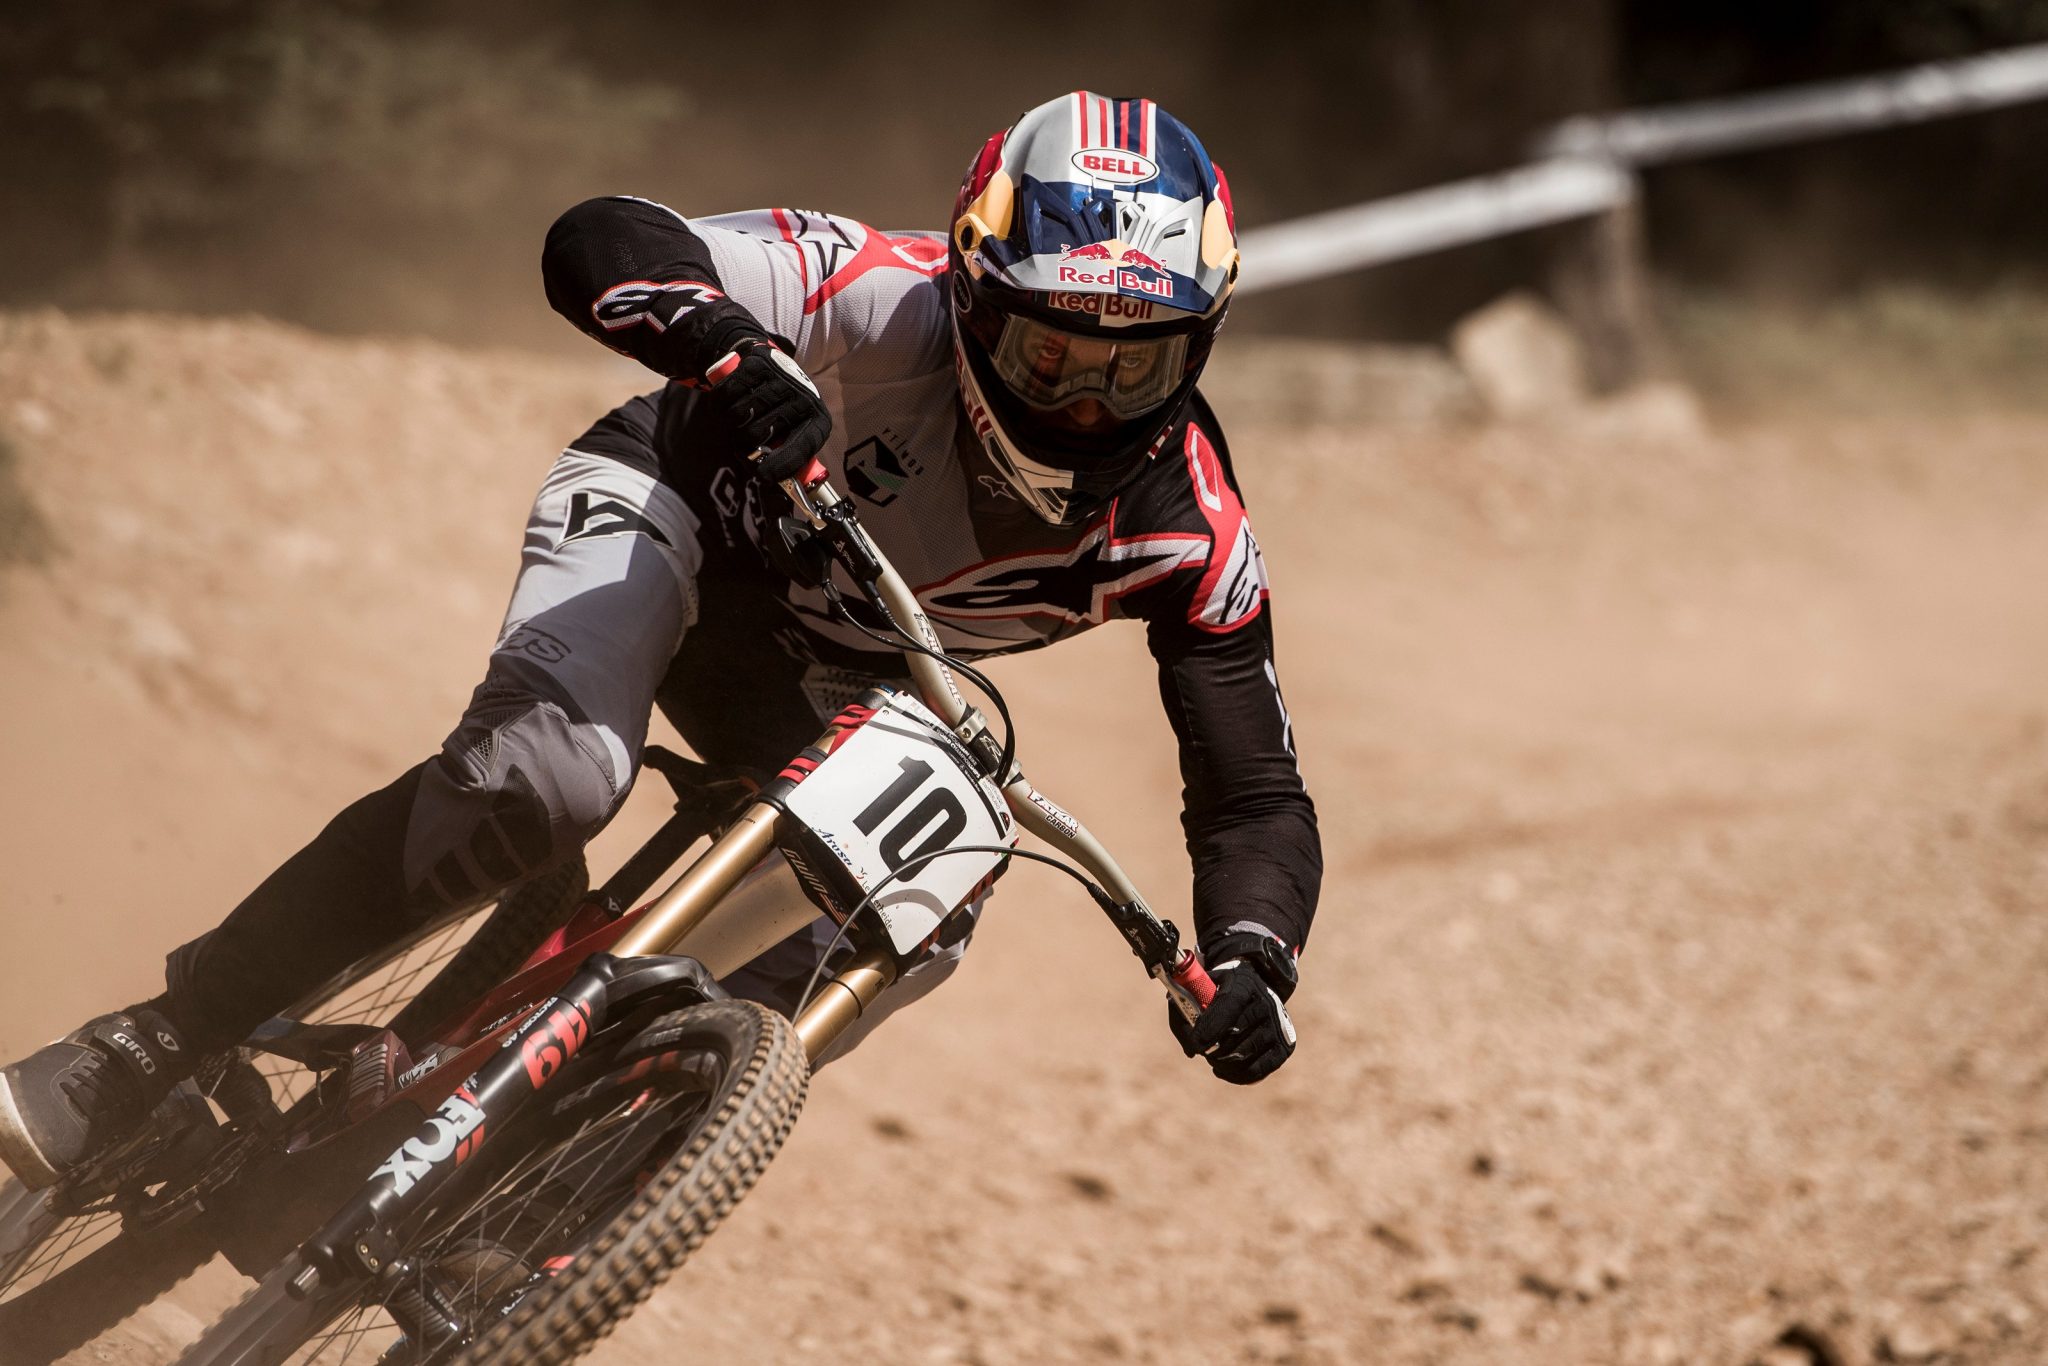 Round 1 Of The Mercedes-Benz UCI Mountain Bike World Cup 2019 LIVE On Red Bull TV | IMB | Mountain Bike Magazine Online